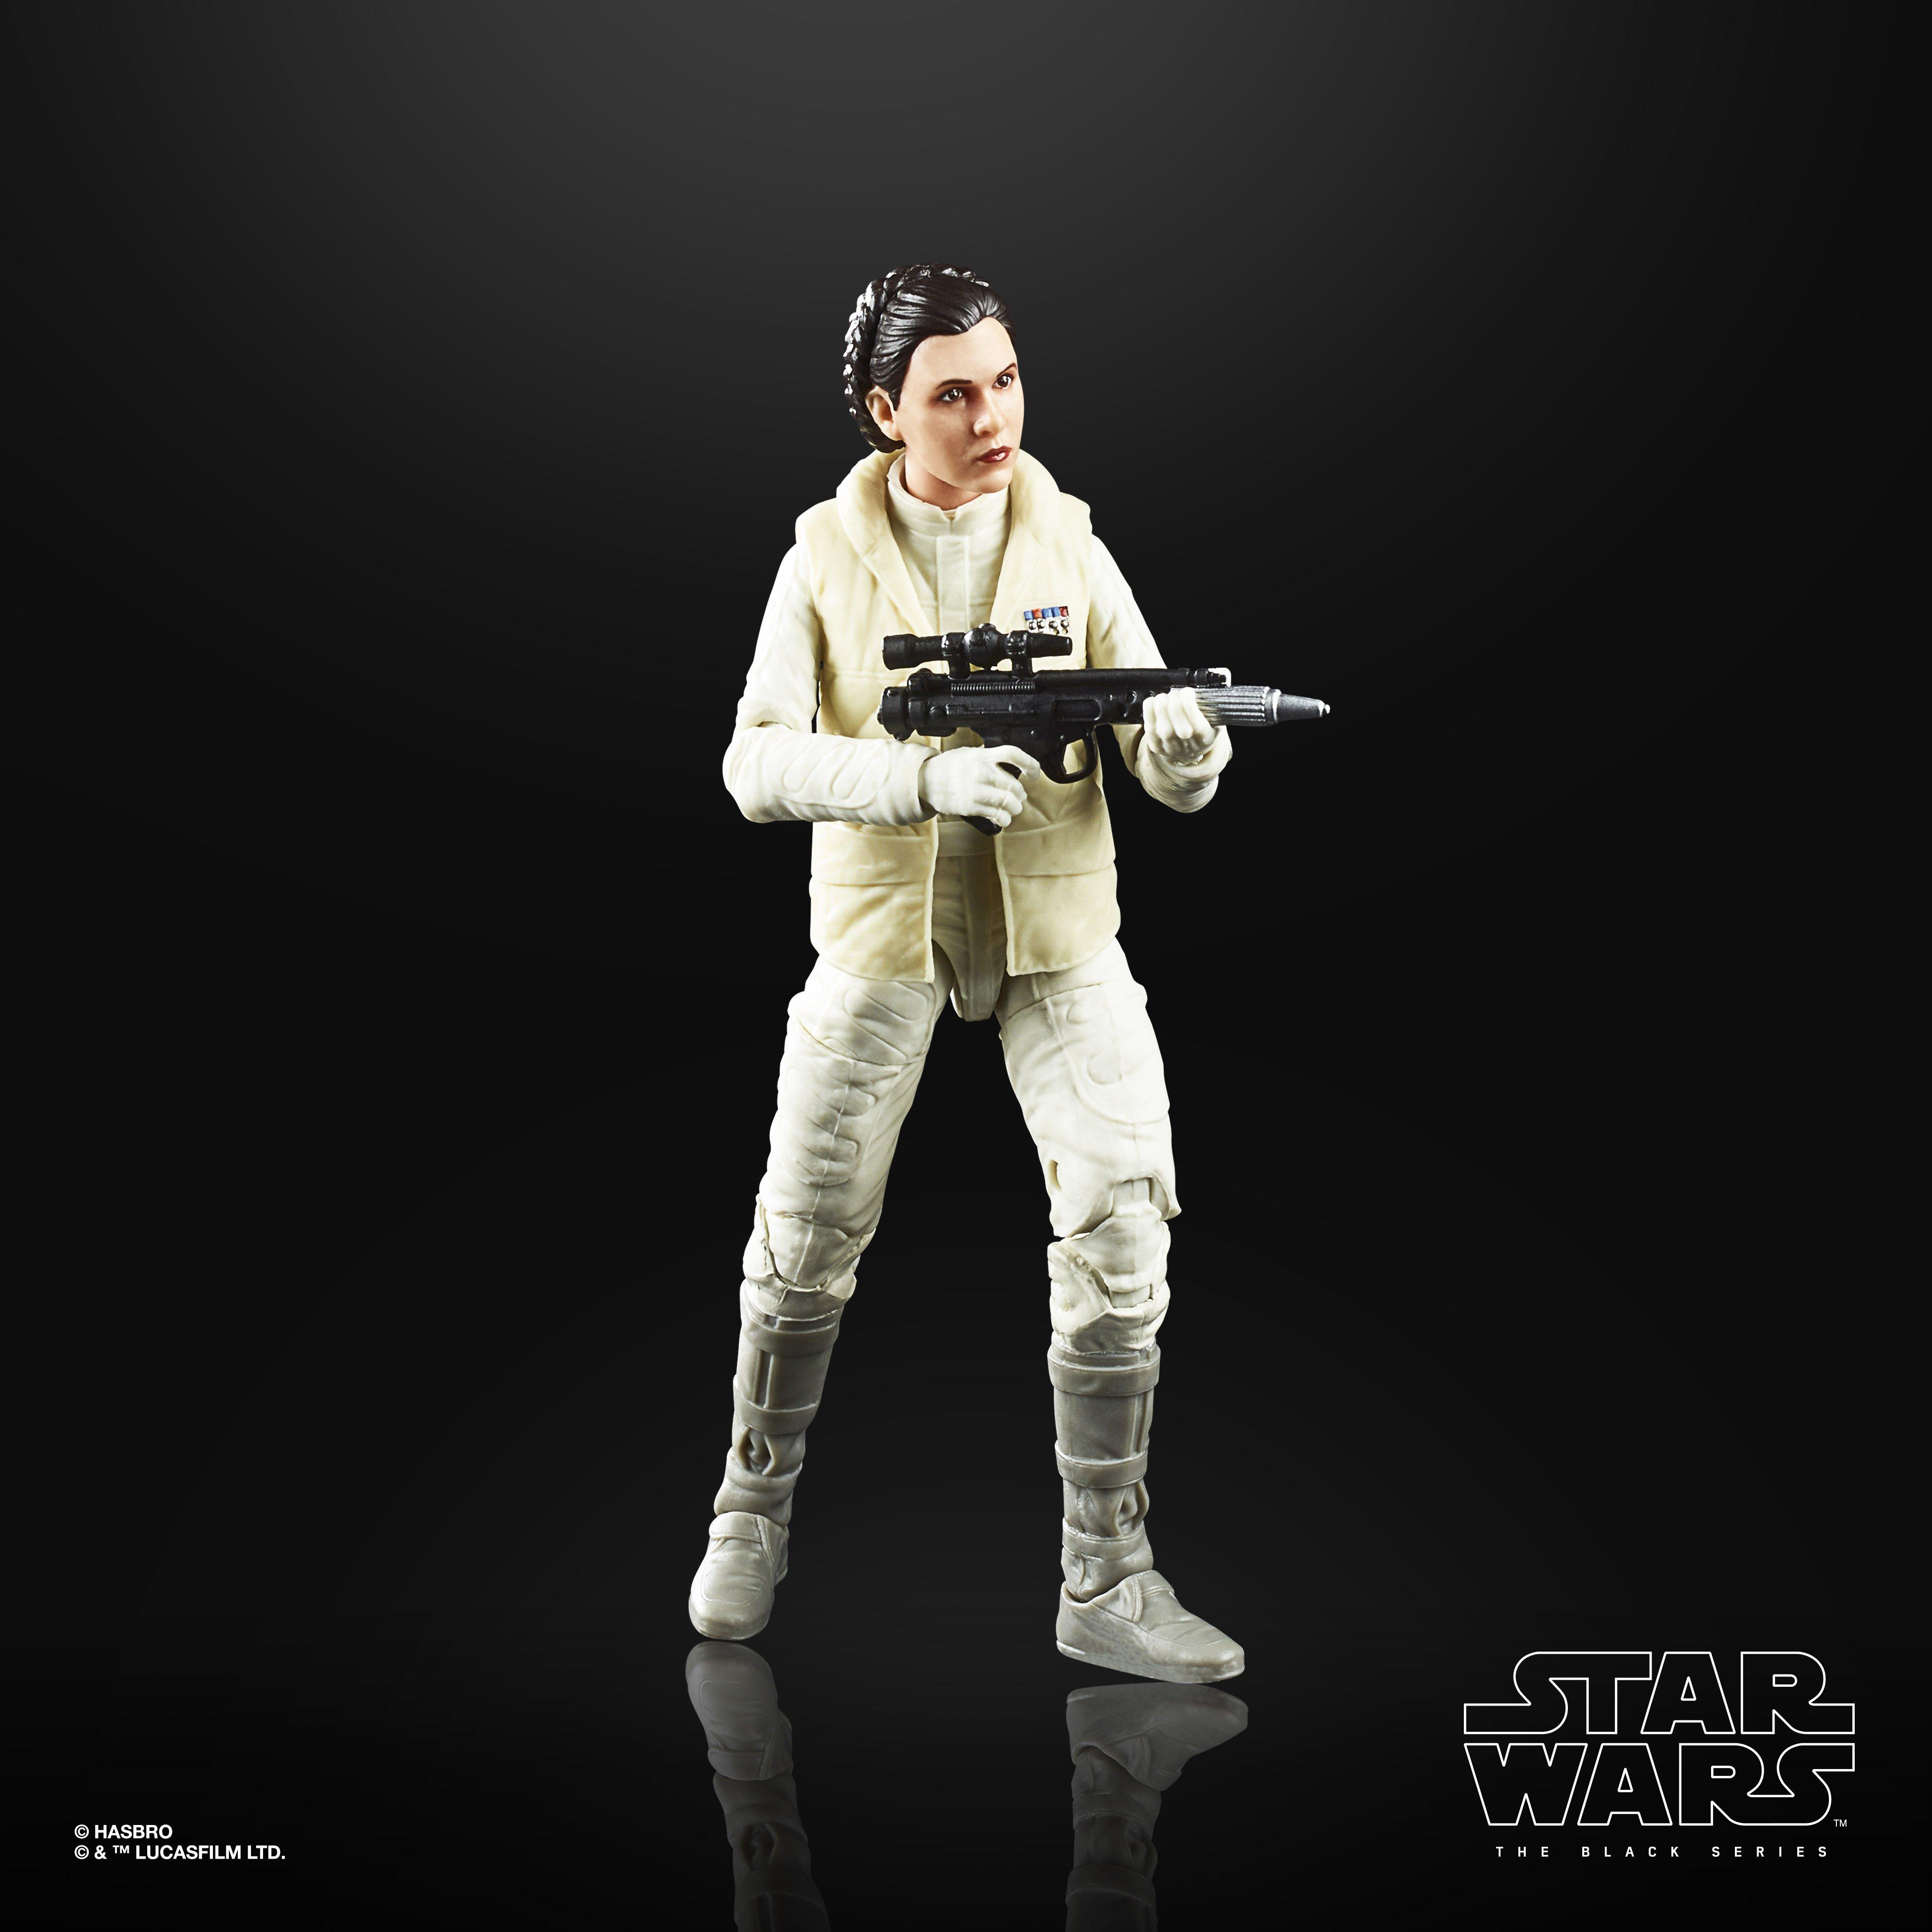 Hasbro Star Wars Episode V: The Empire Strikes Back 40th Anniversary Princess Leia Hoth 6-in Action Figure